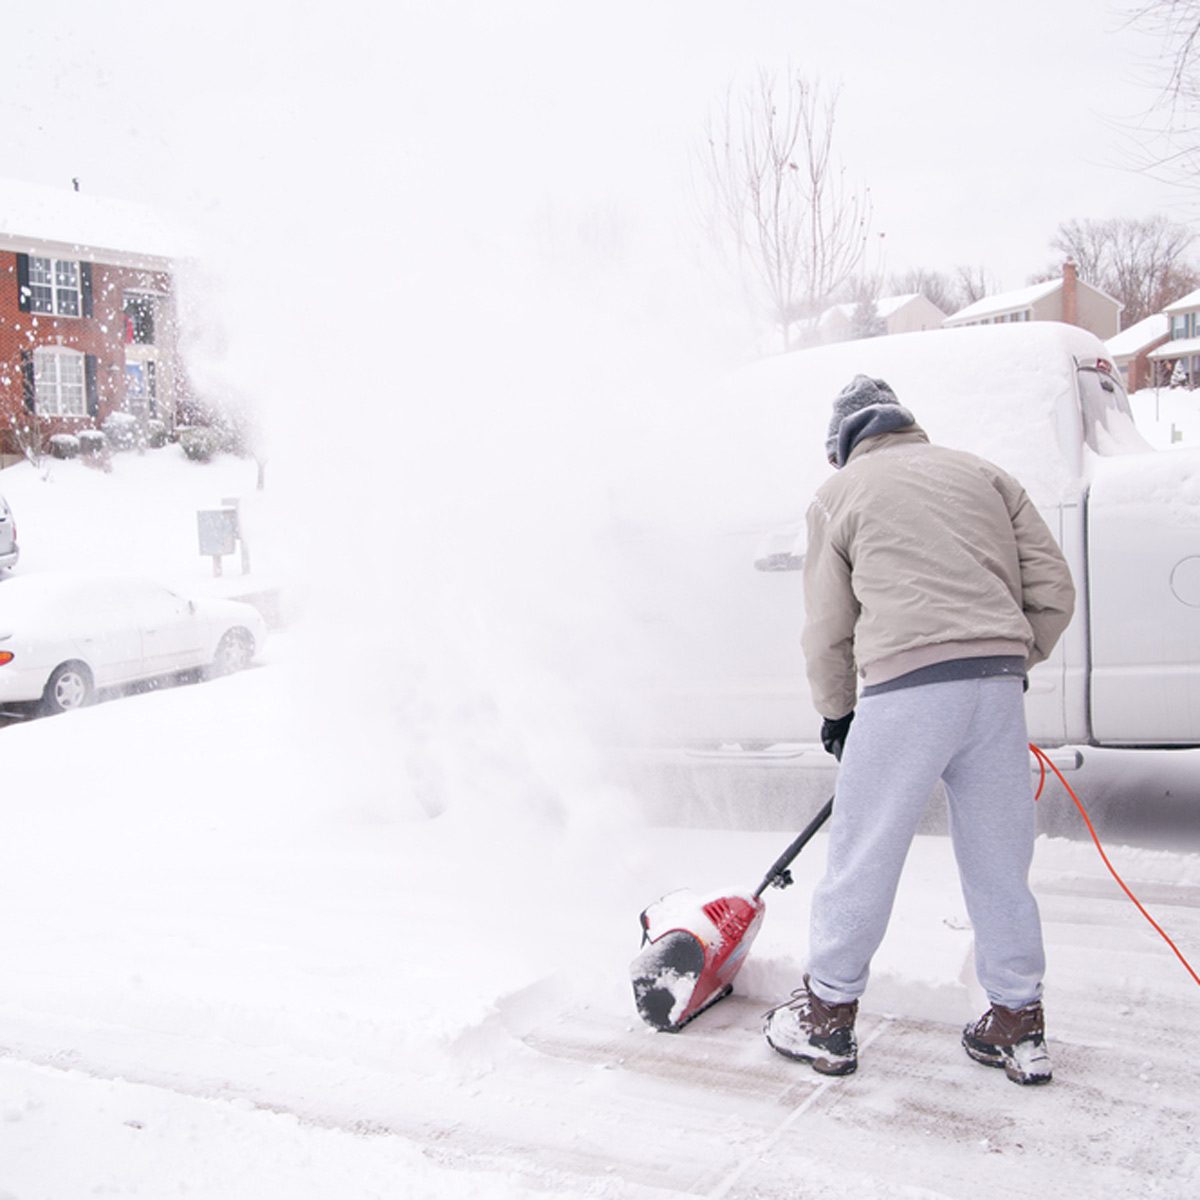 Shoveling vs. Snowblowing vs. Snowplowing: Pros and Cons